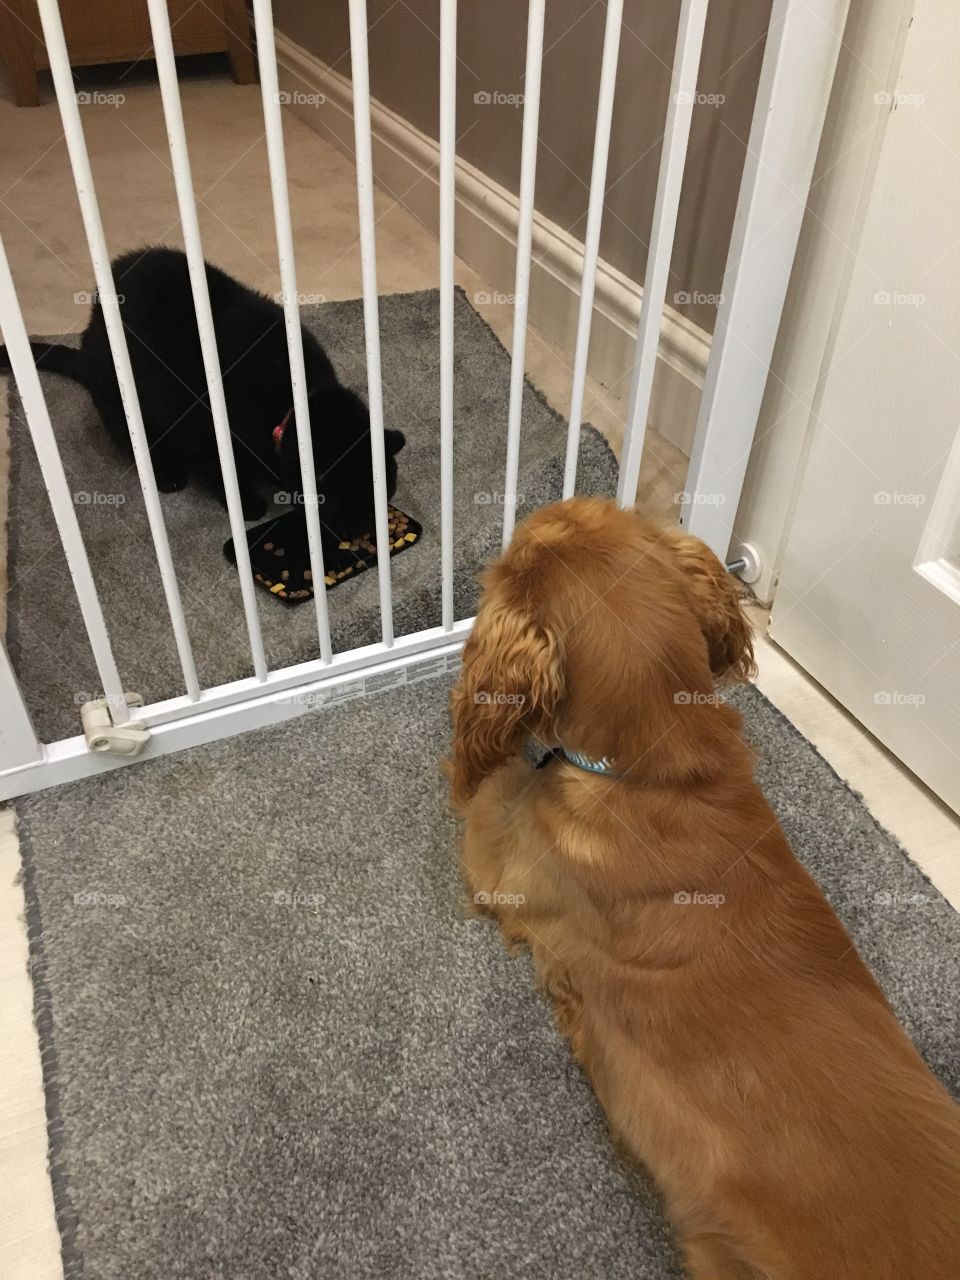 Cocker spaniel puppy watching the cat through the stair gate that separates them! Best friends or rivals?